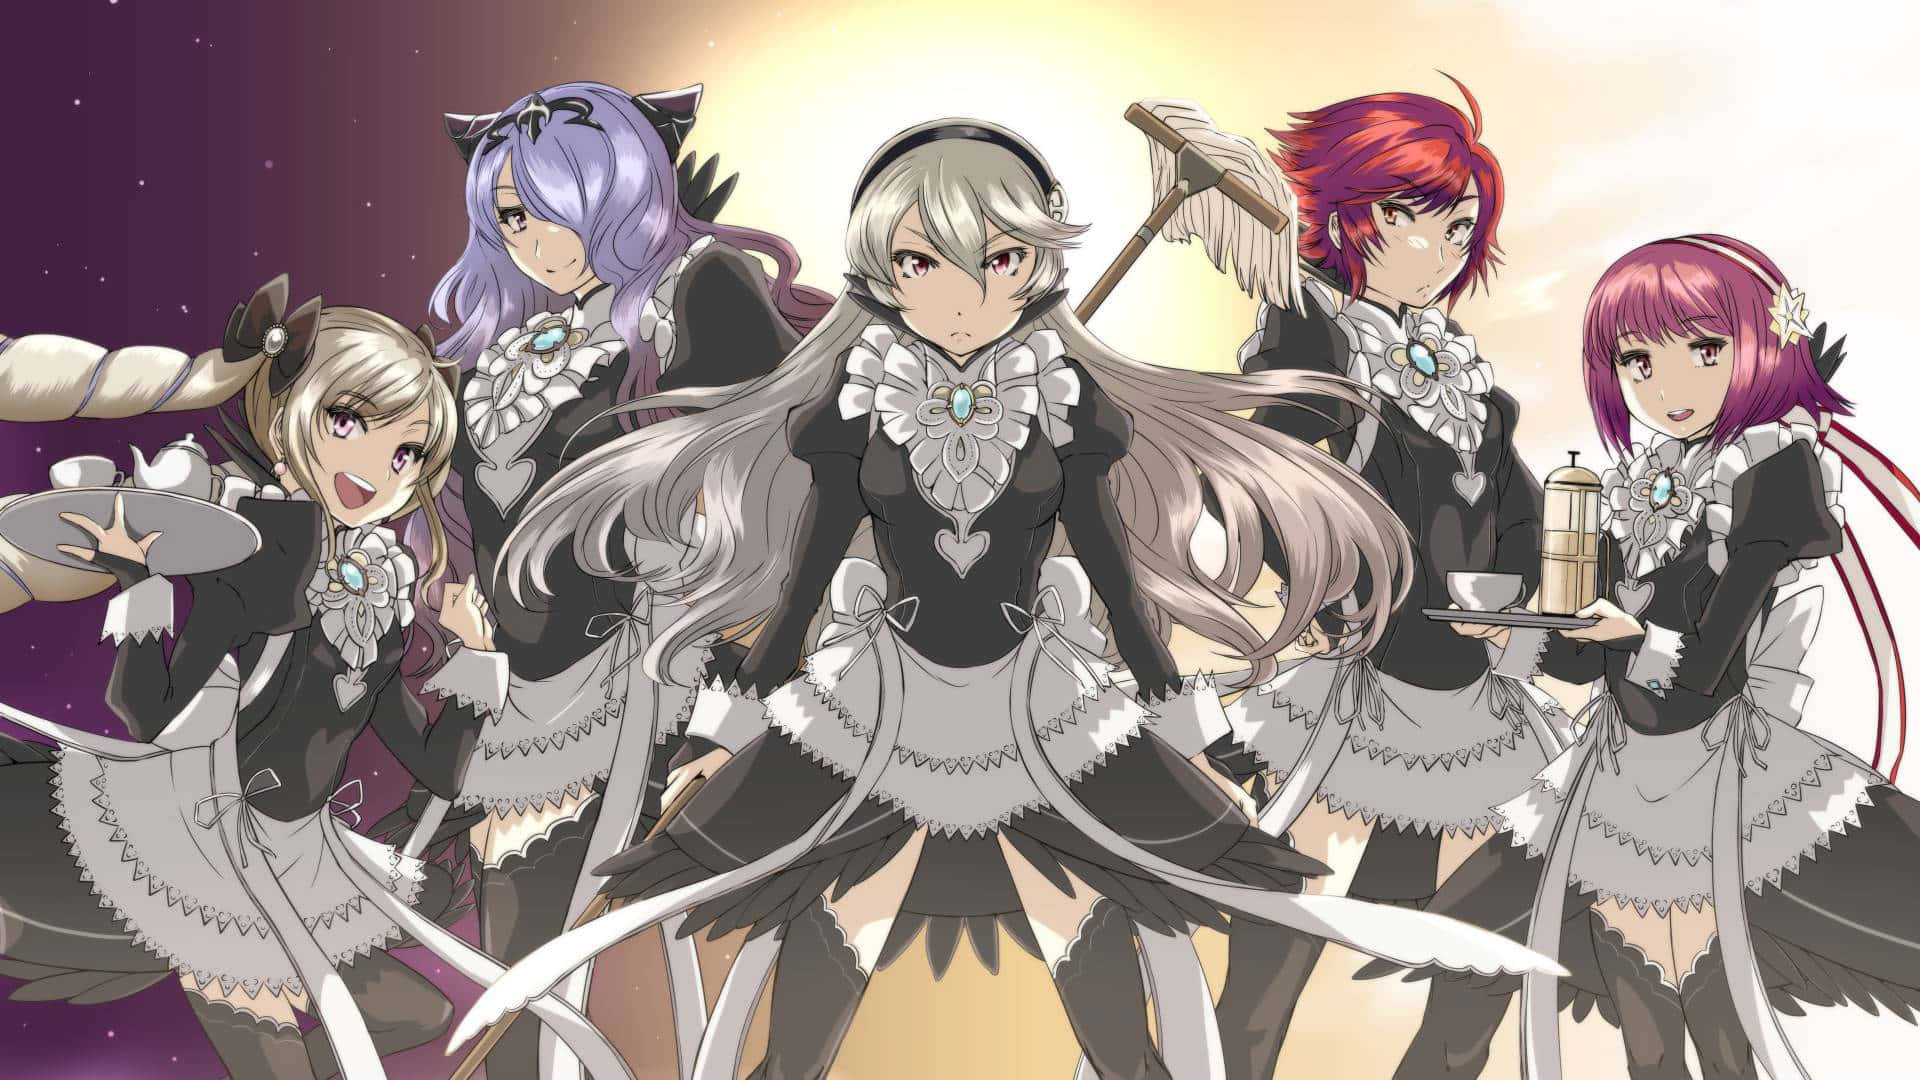 Fire Emblem Fates Female Heroes In Maid Outfits Wallpaper